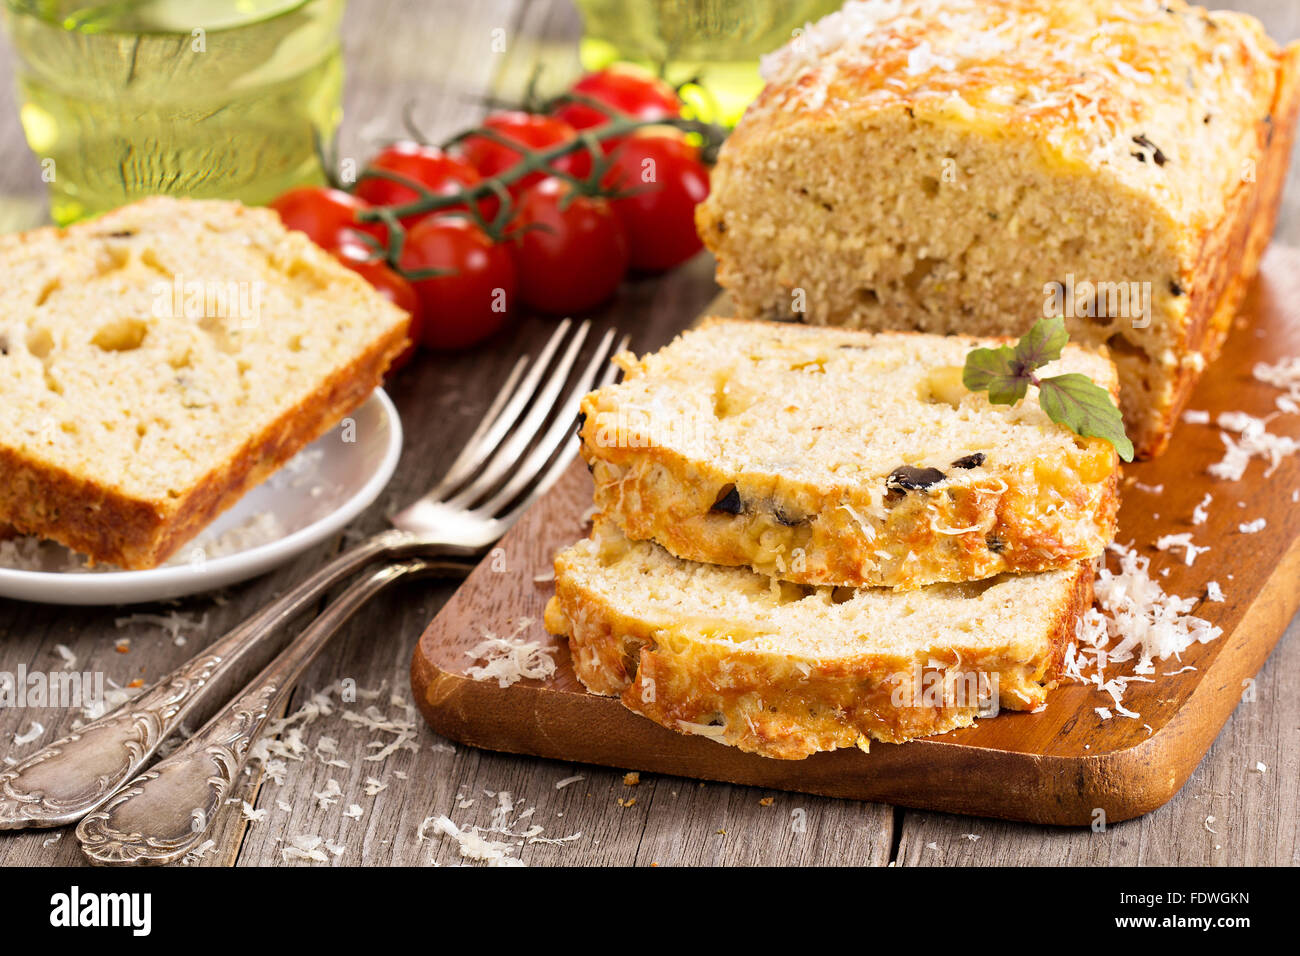 Savoury loaf cake with tomatoes, cheese and olives Stock Photo